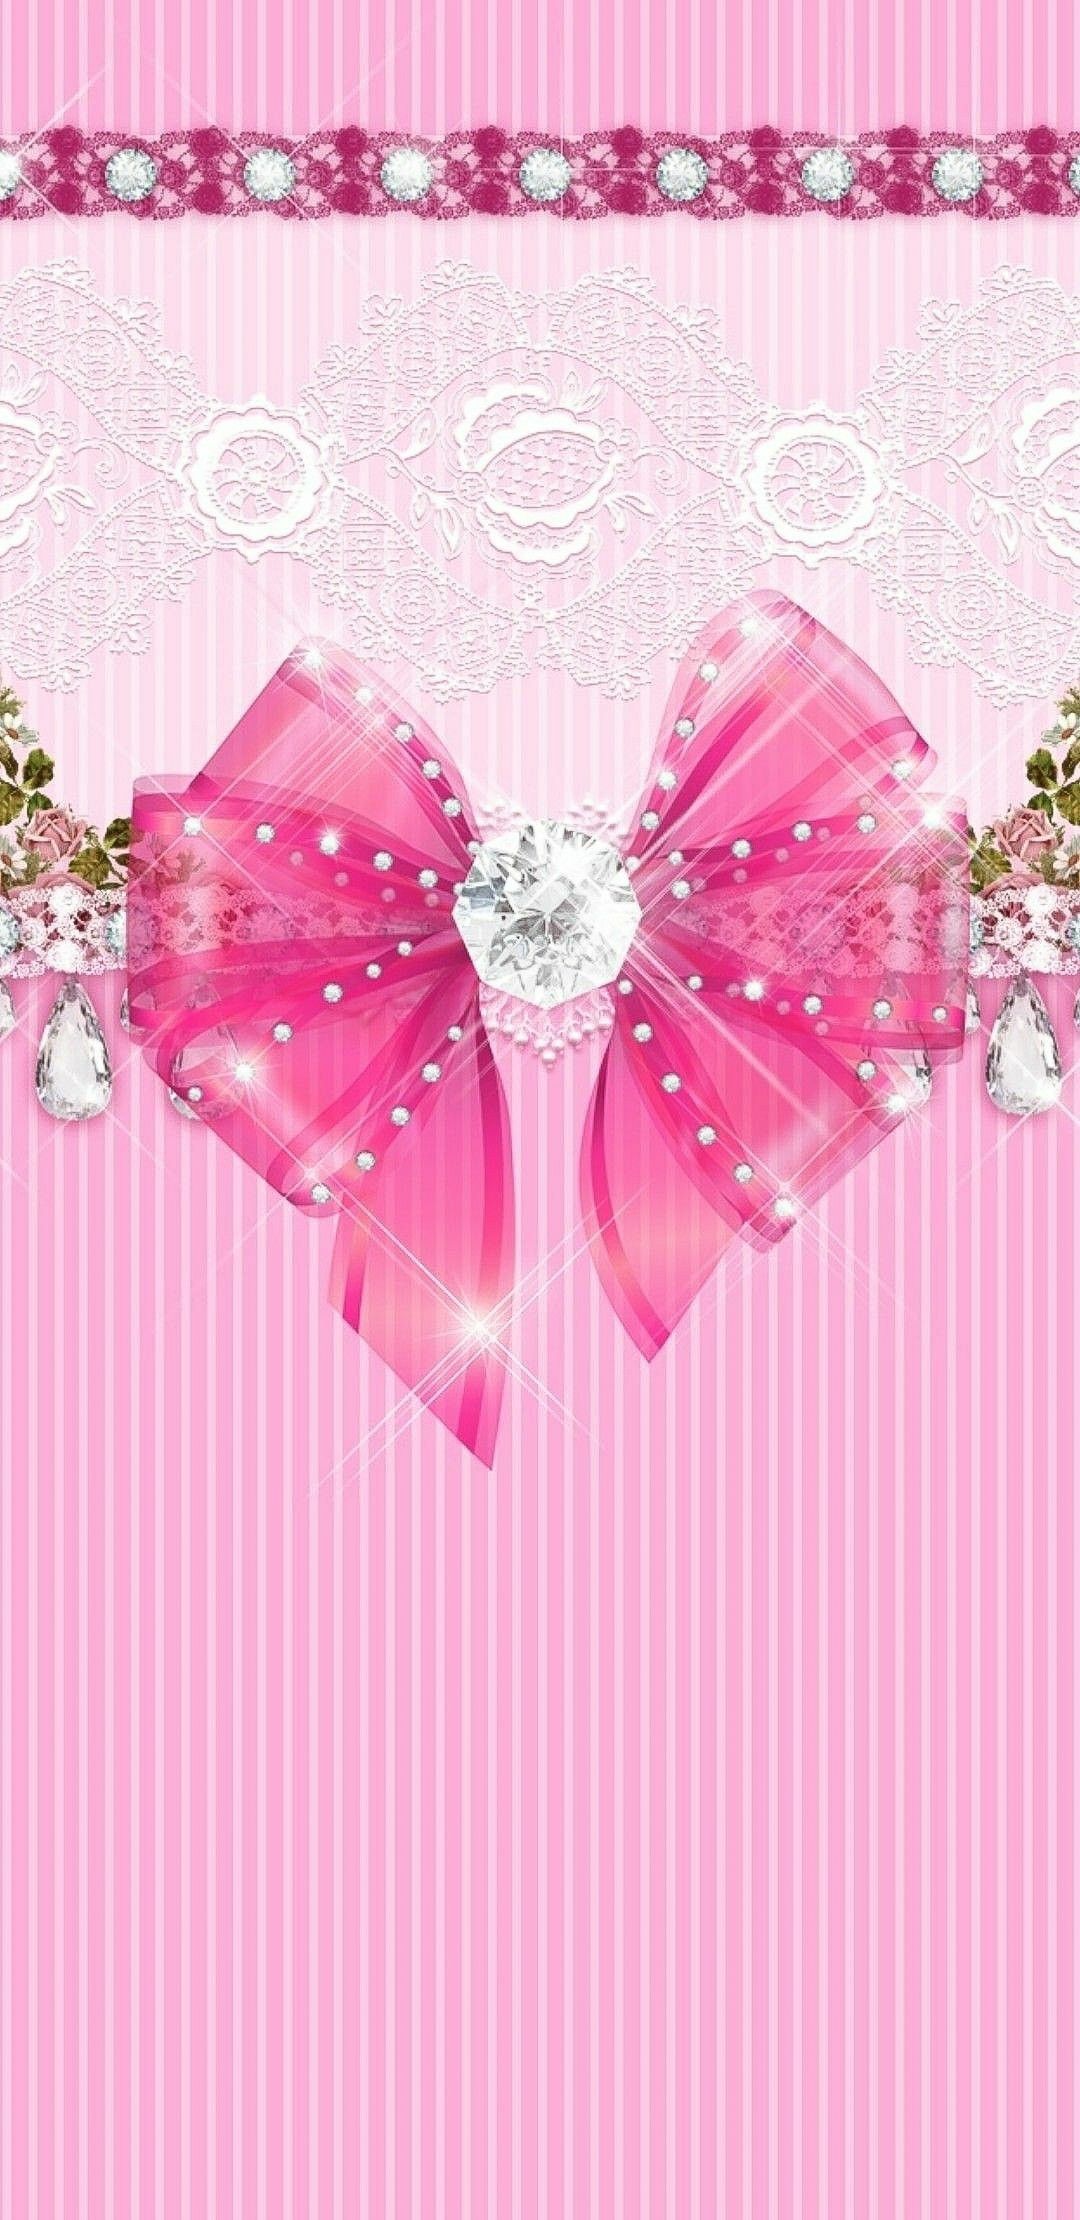 Wallpaper.By Artist Unknown. Bow wallpaper, Cute wallpaper for phone, Pink wallpaper